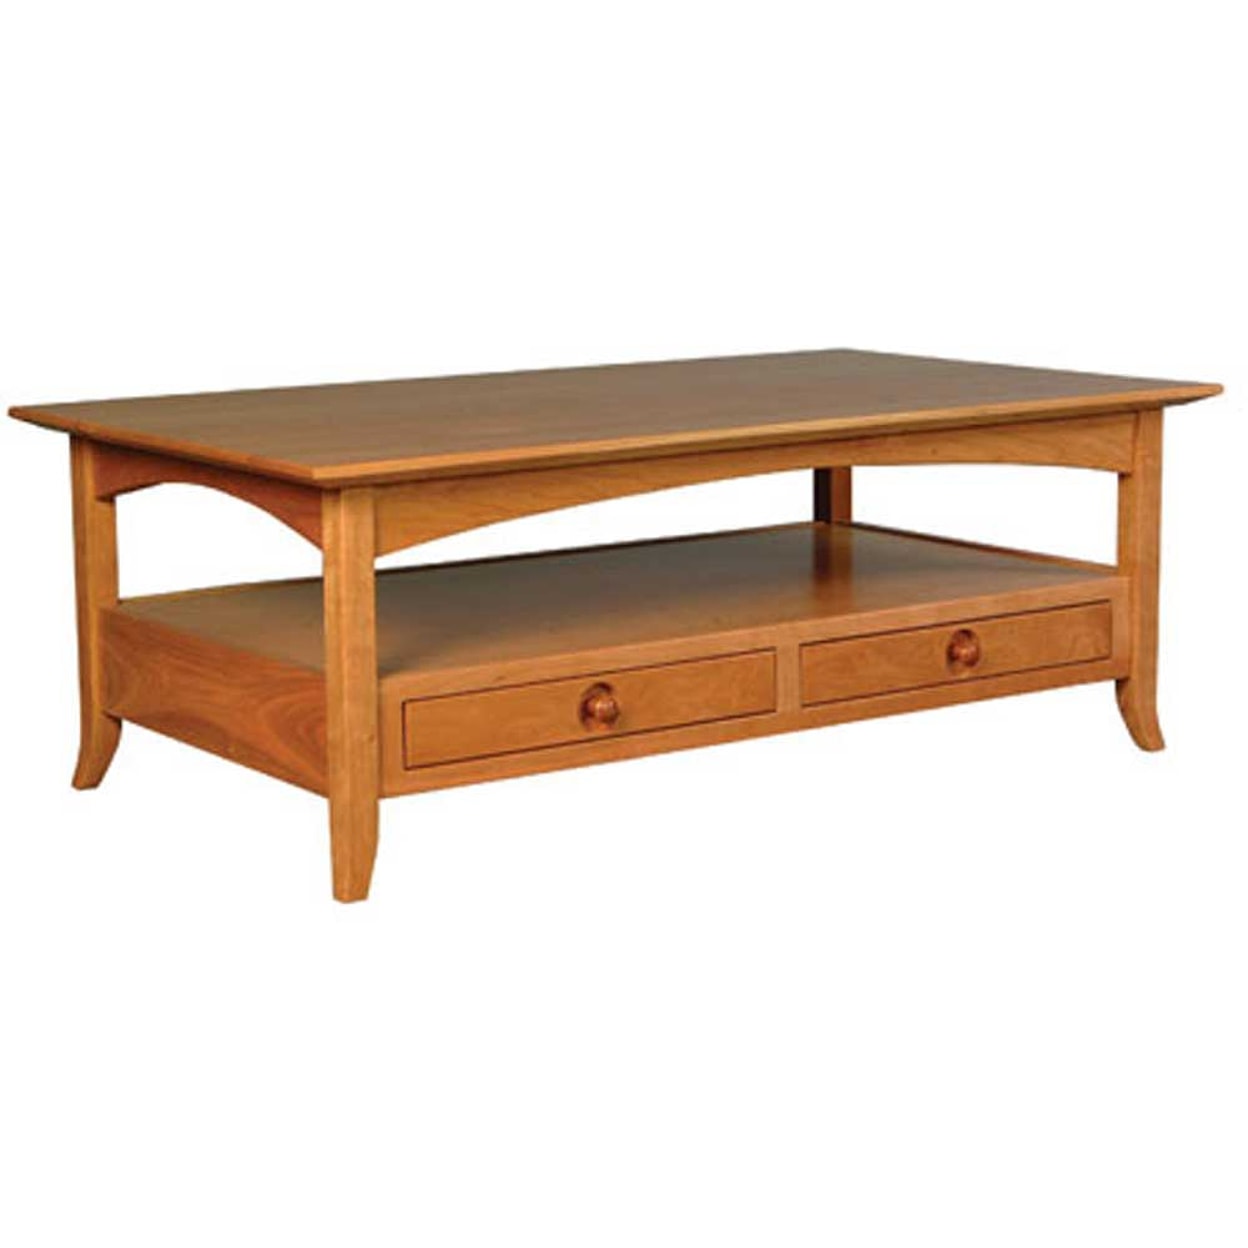 Simply Amish Shaker Amish Coffee Table